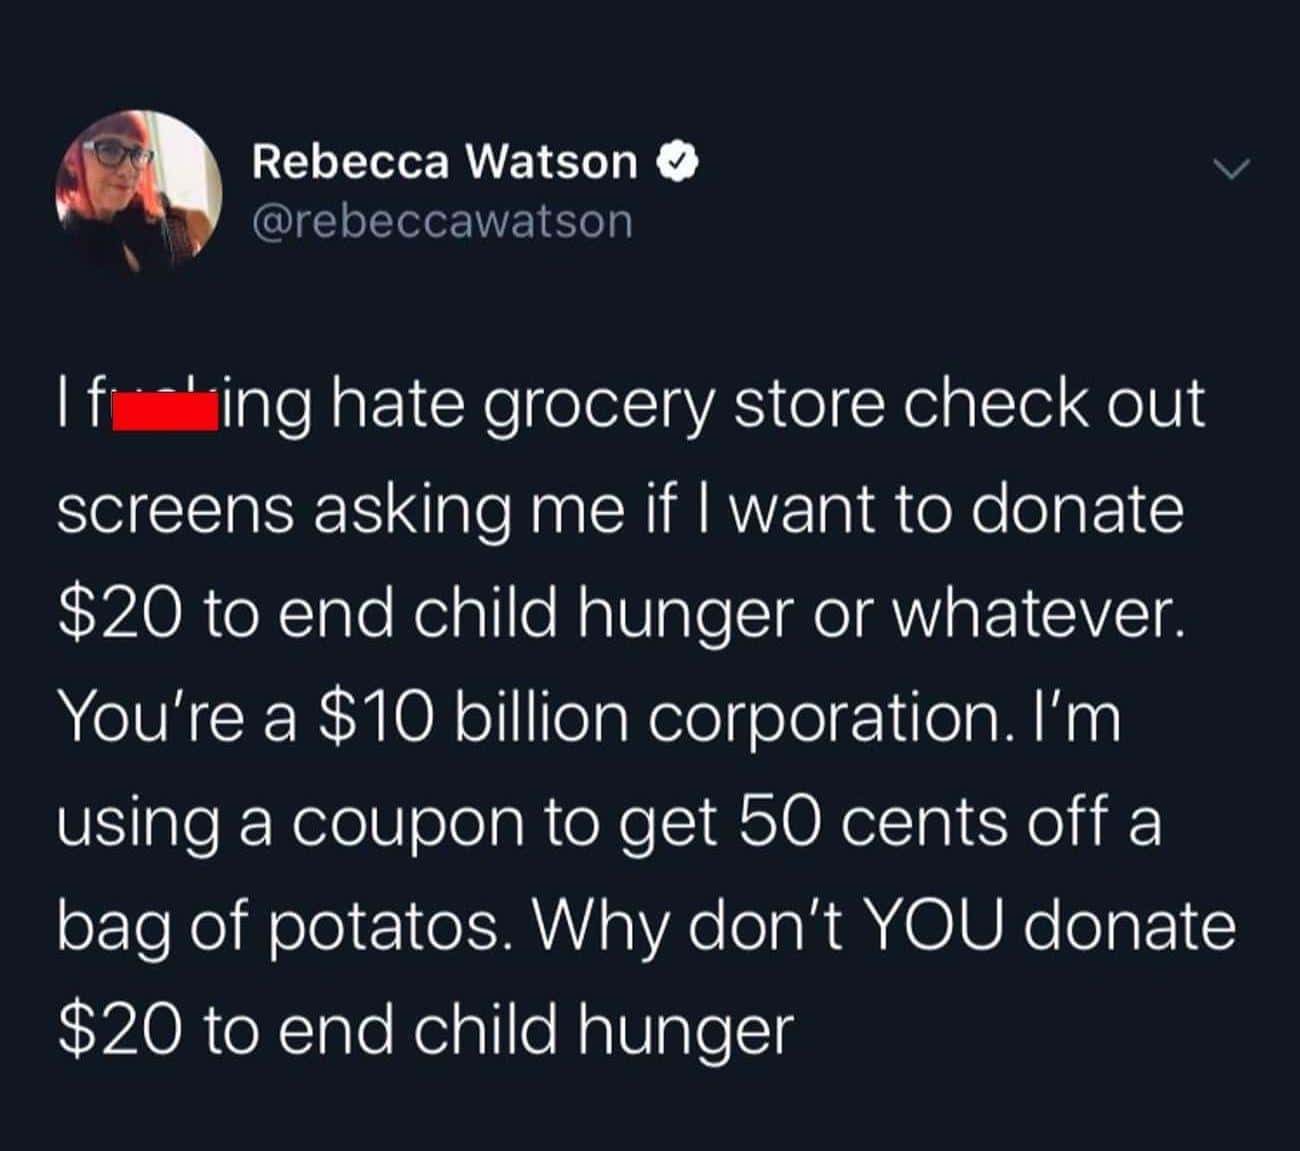 Why Don't YOU Donate?